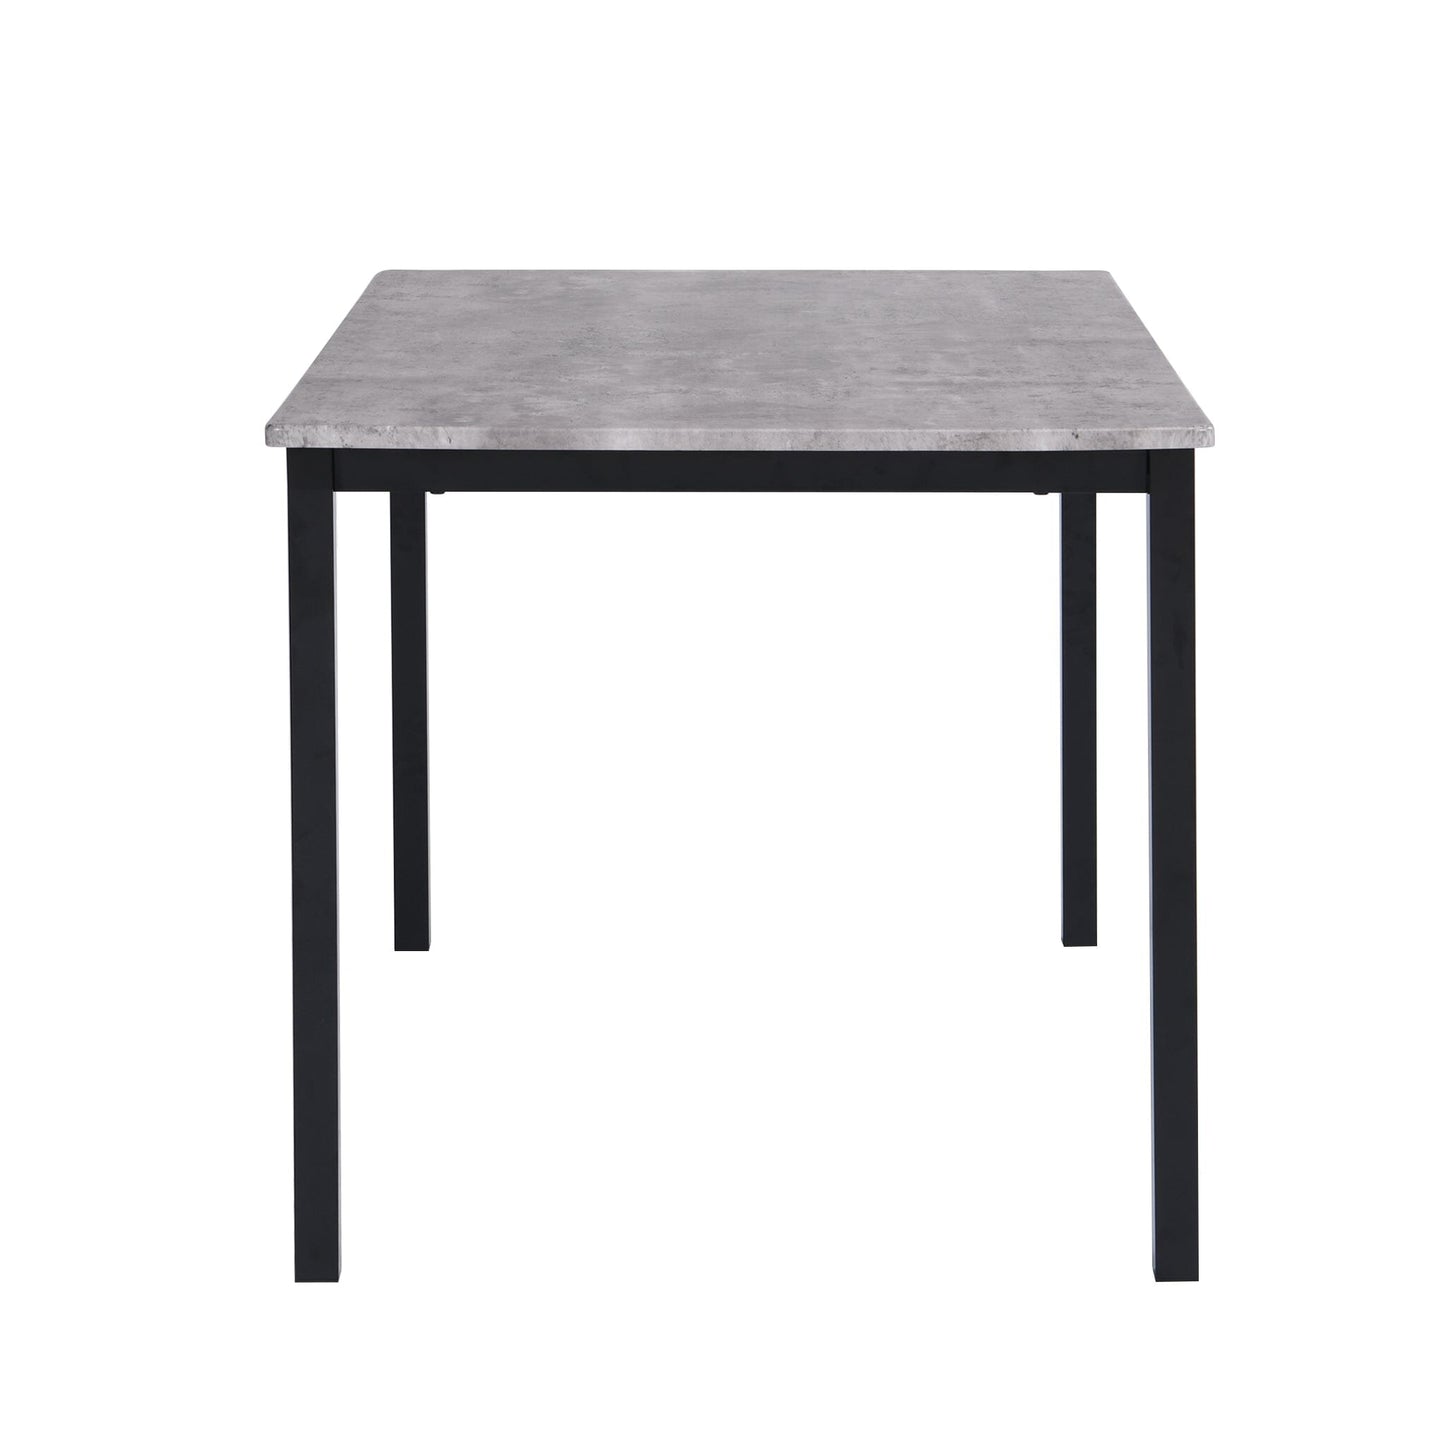 Milo Black Concrete Dining Table Set - 6 seater - Bella Grey and Black Chairs Set - Laura James